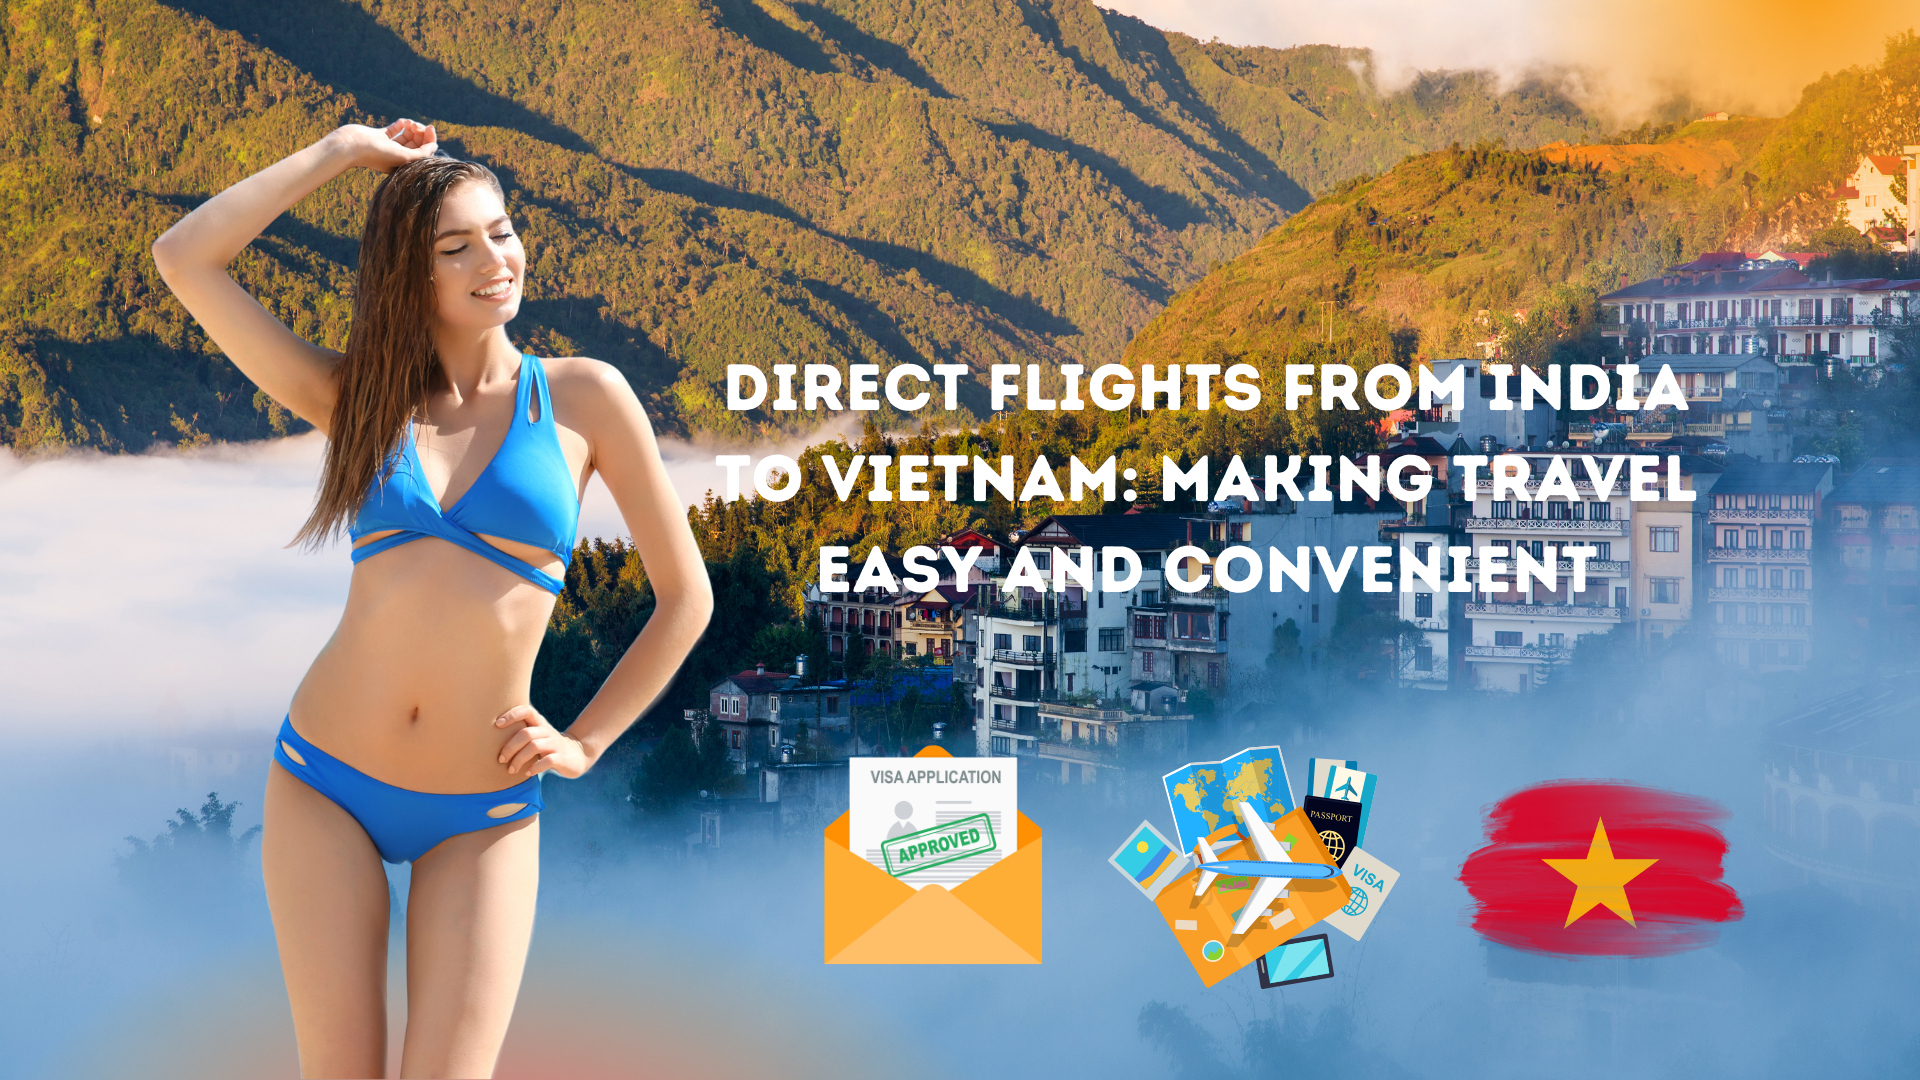 Direct Flights from India to Vietnam: Making Travel Easy and Convenient